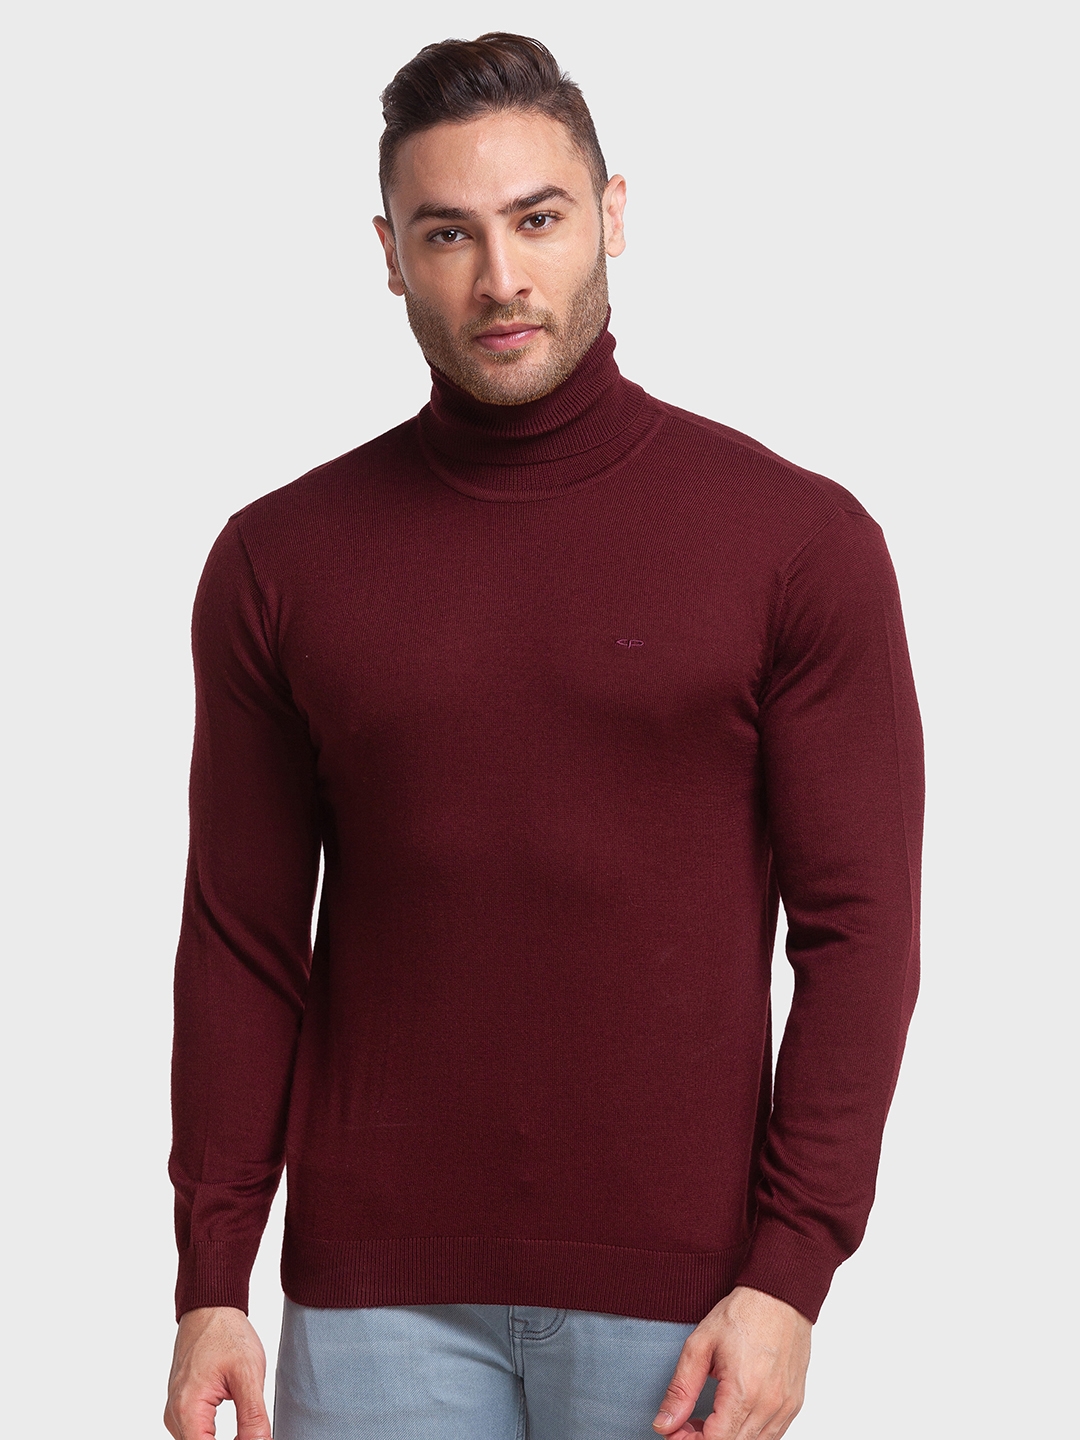 ColorPlus Tailored Fit Red Sweater For Men